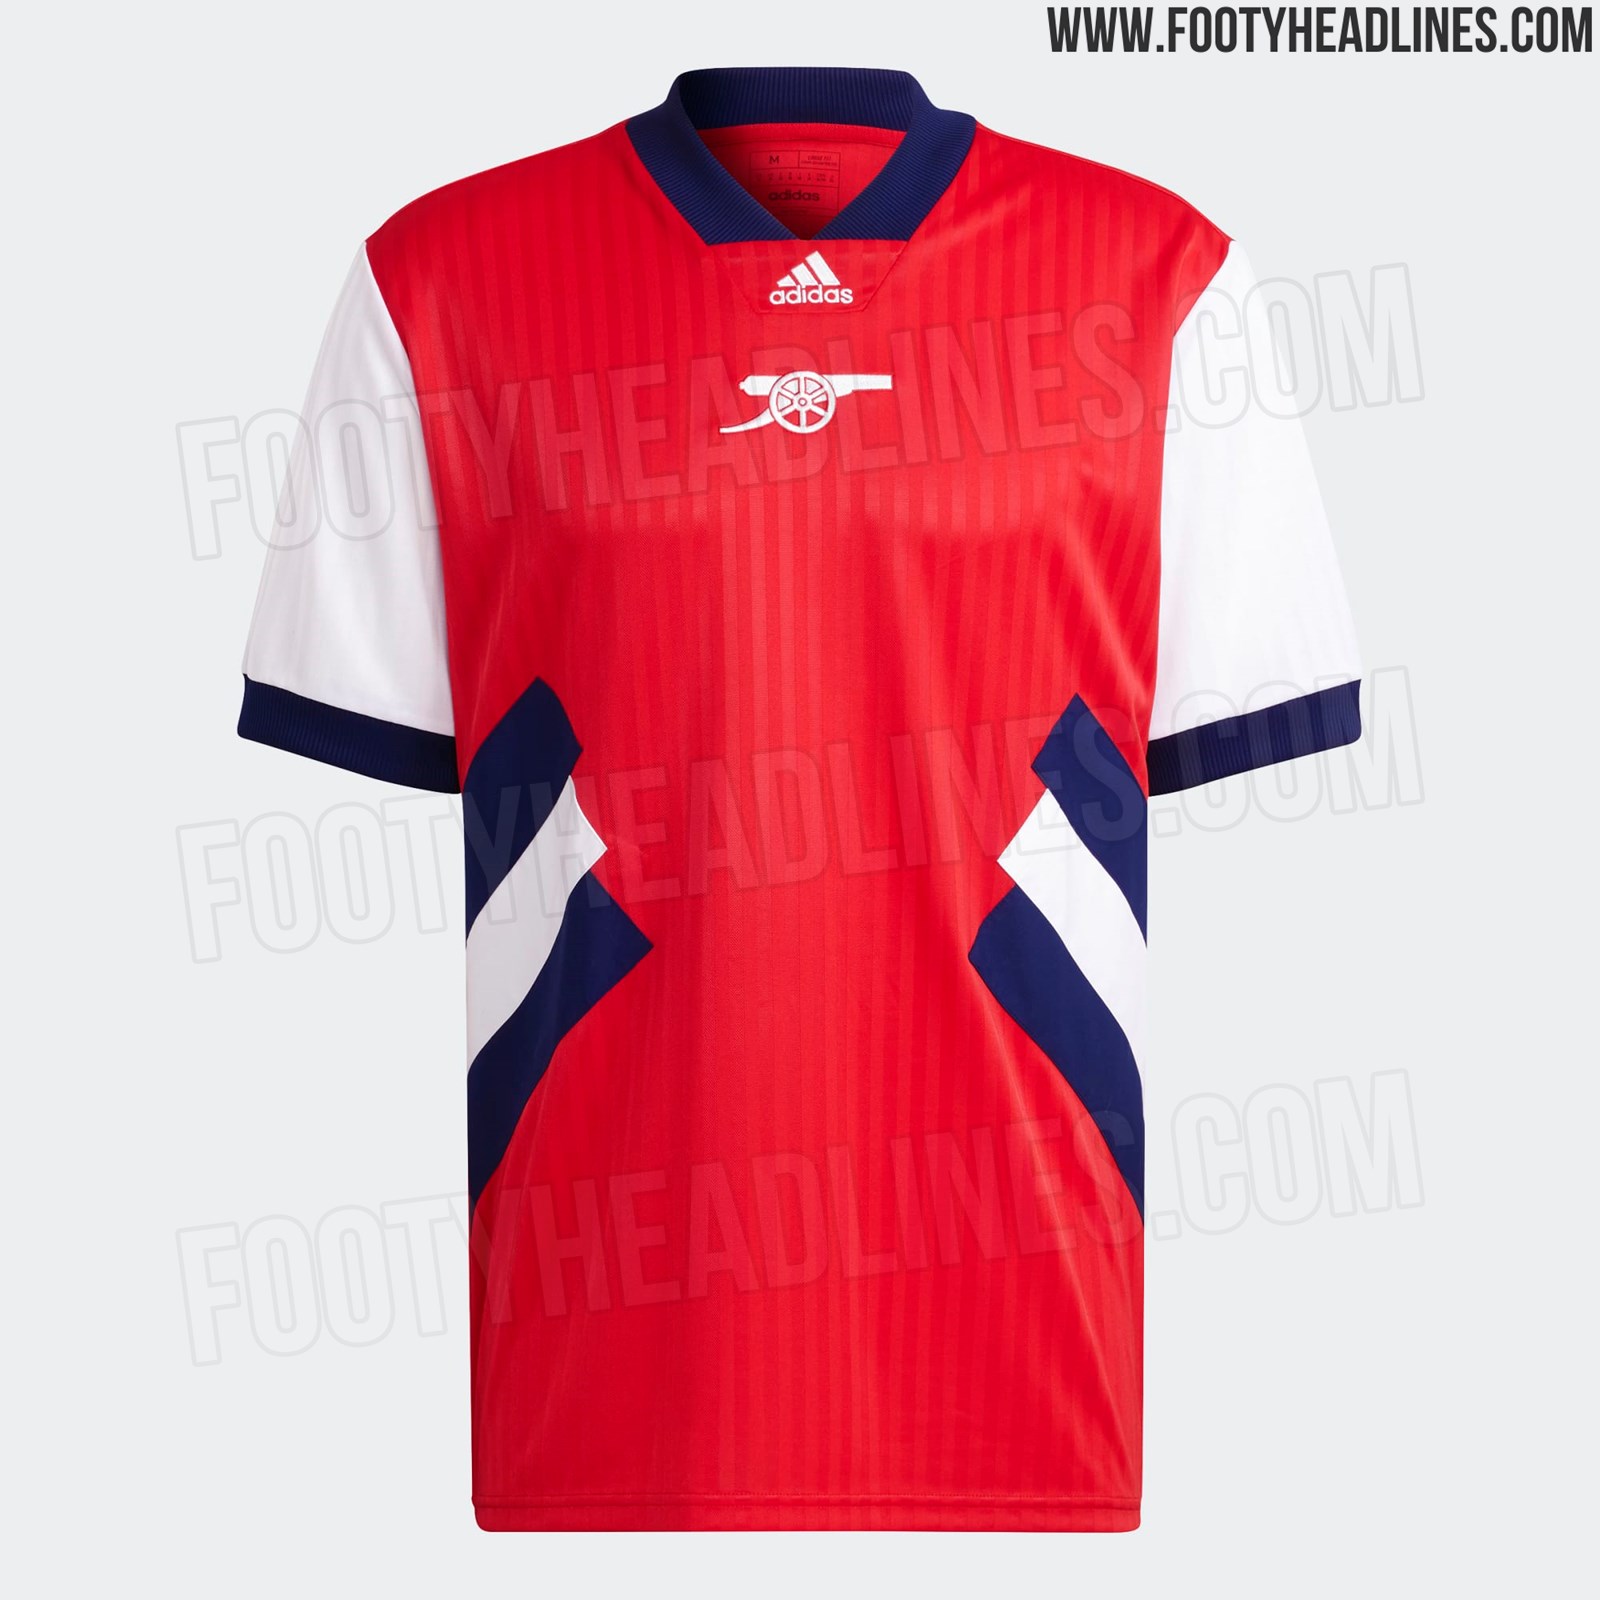 Arsenal's retro-inspired new kit leaked - but fans notice it's